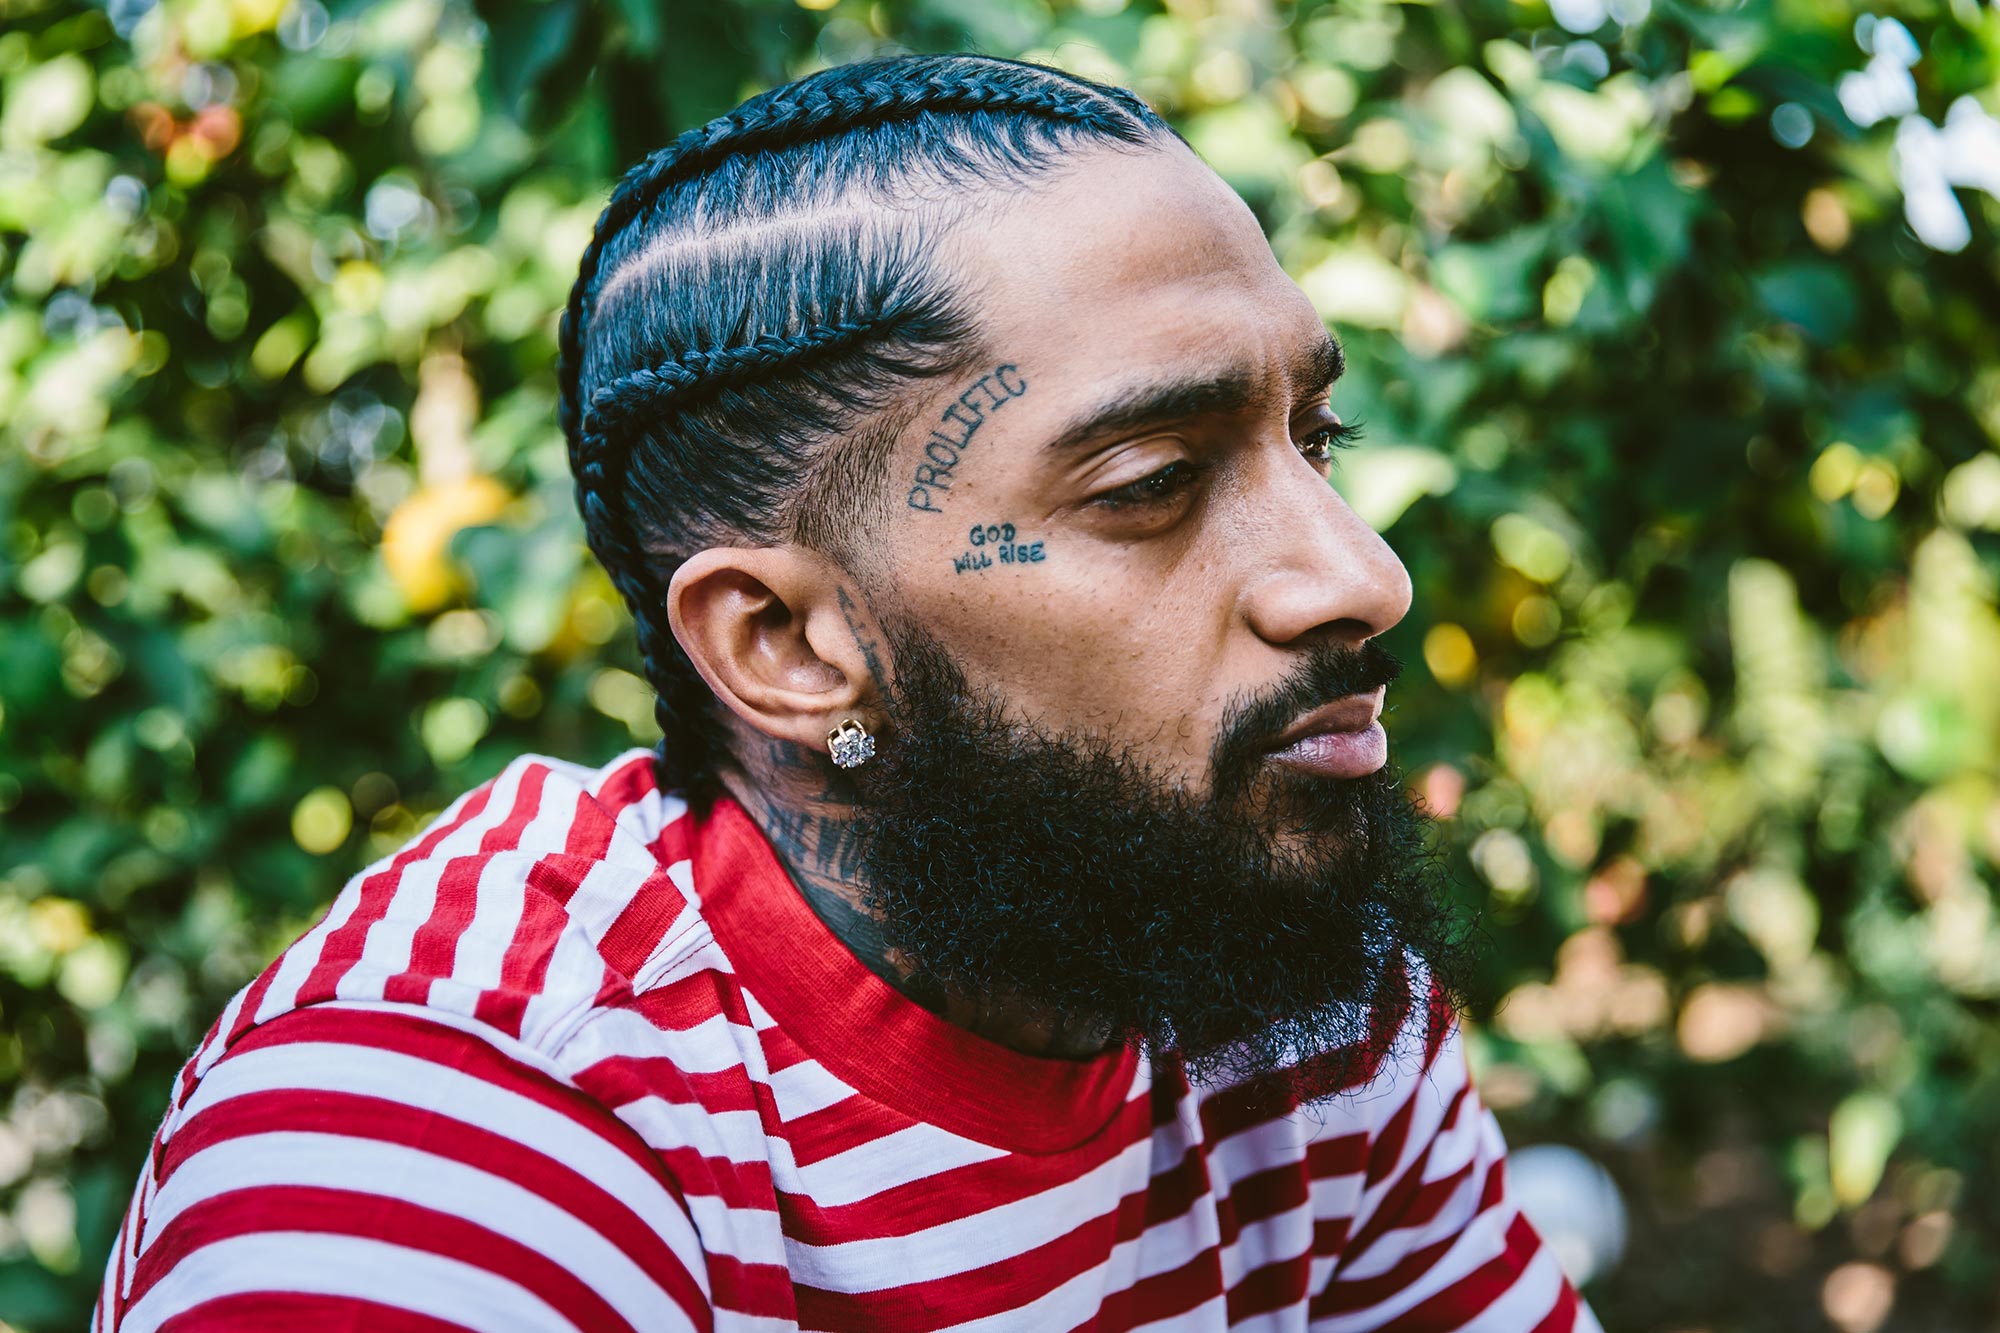 Nipsey Hussle Shooter Identified by the LAPD, They May Have Had a Personal Dispute